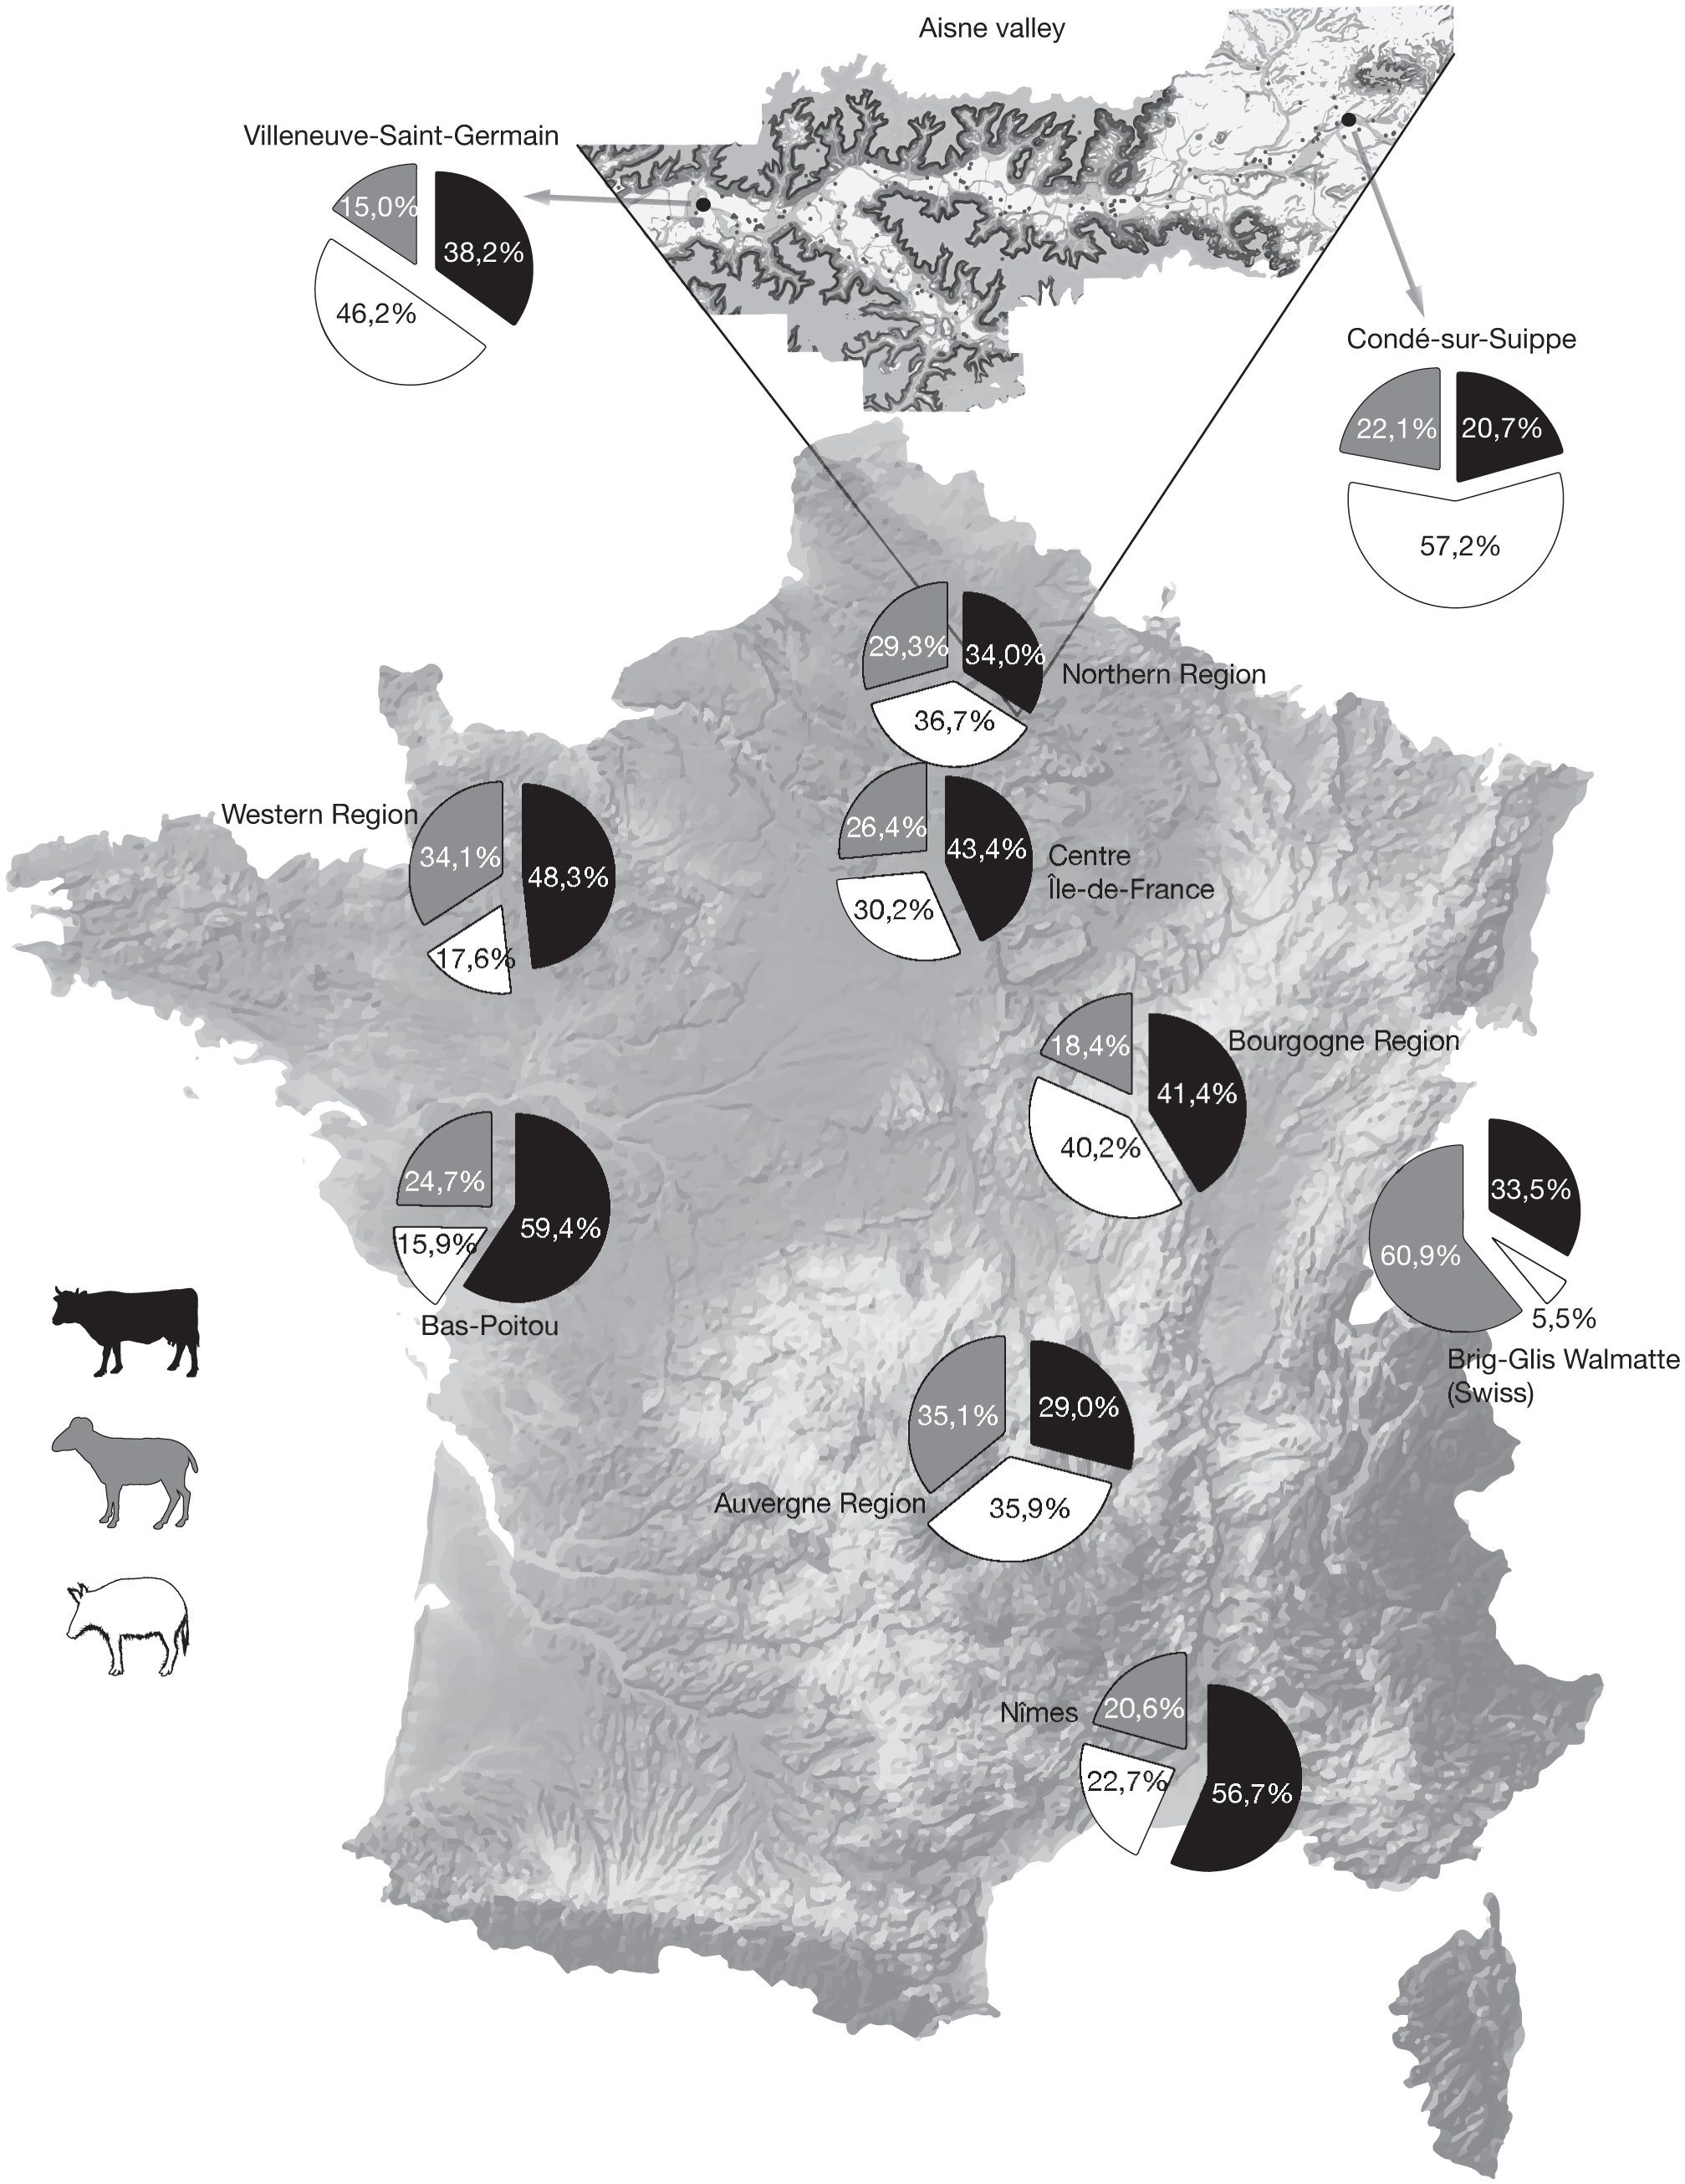 Socio-economic changes and their implication in the consumption and trade  of meat during the La Tène period in Northern France: the cases of the  Villeneuve-Saint-Germain and Condé-sur-Suippe (Aisne) oppida